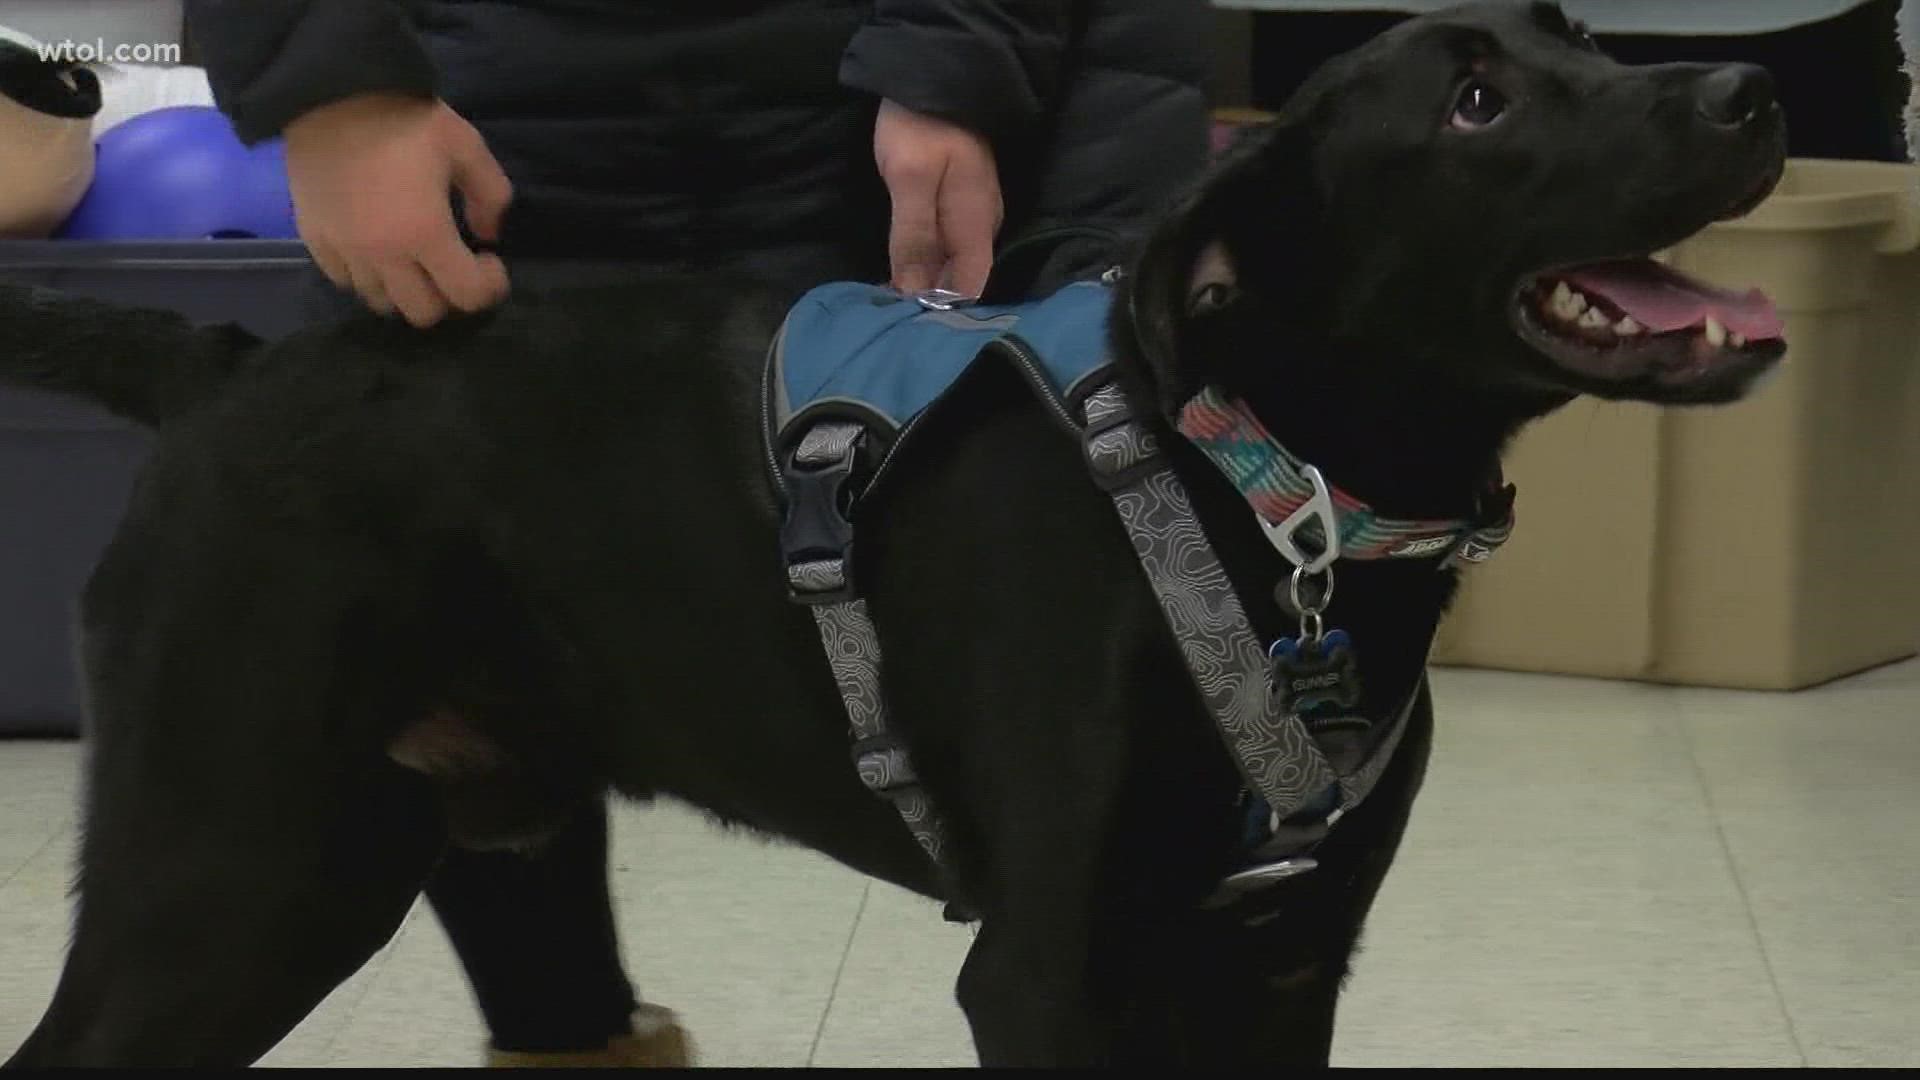 Gunner weighed only 24 pounds when he was found.